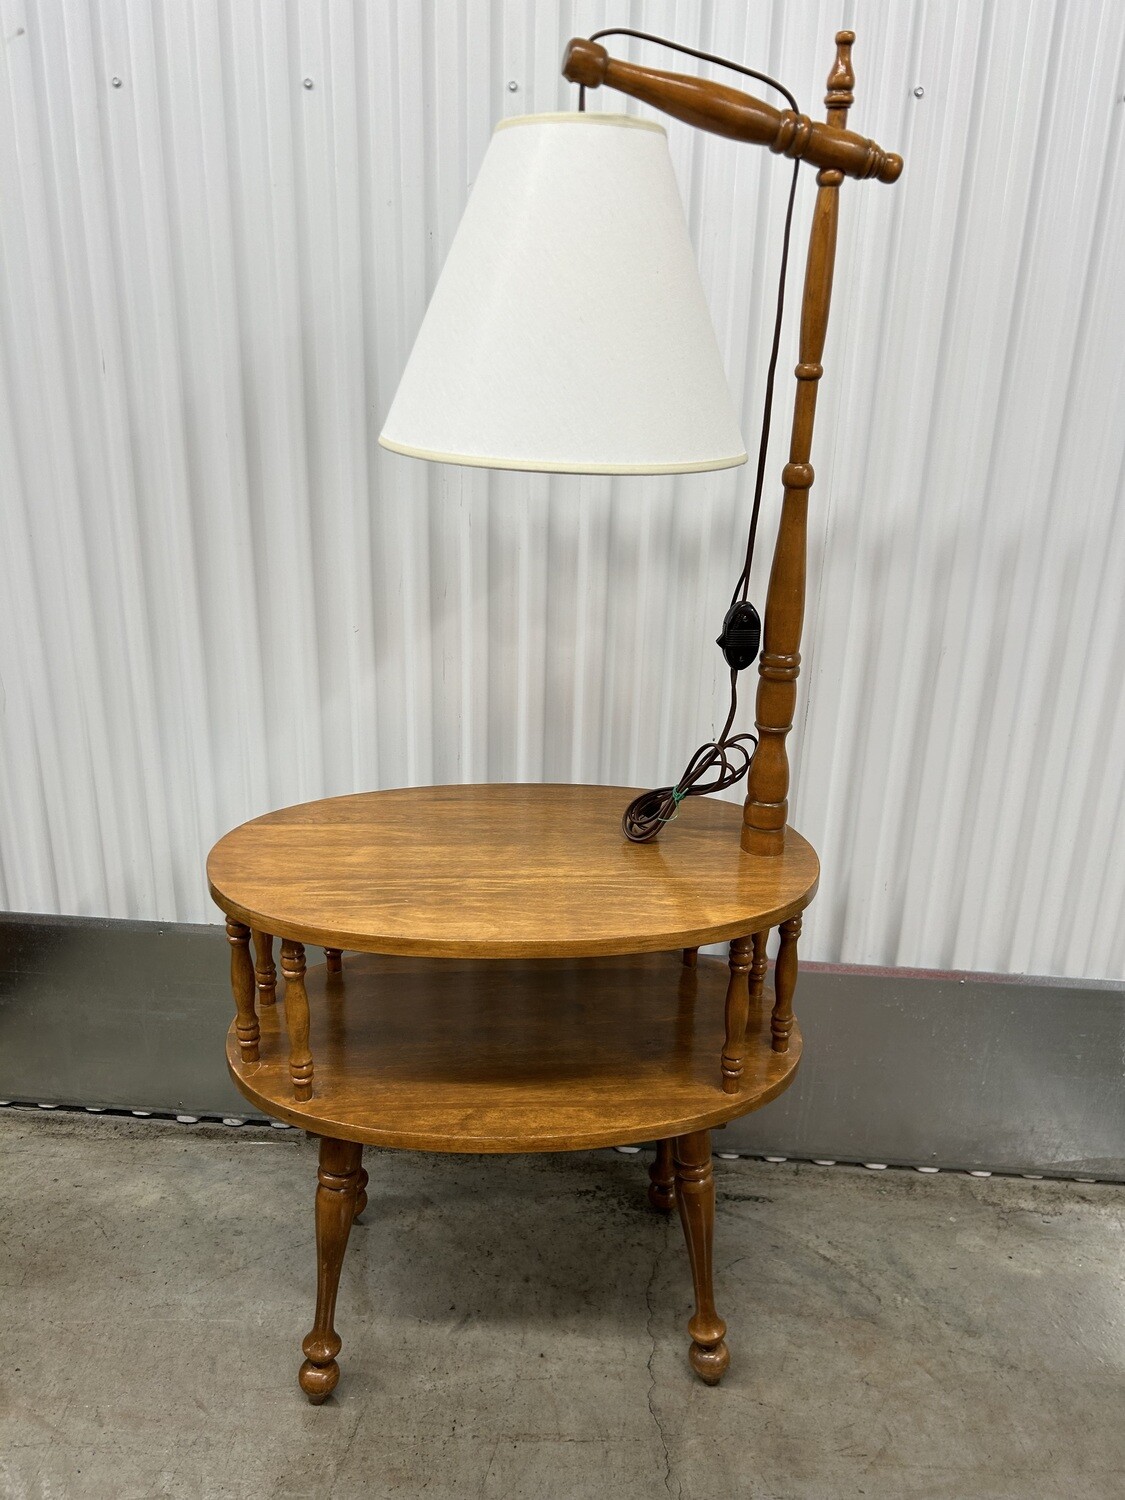 Vintage Maple End Table w/ Lamp #2009